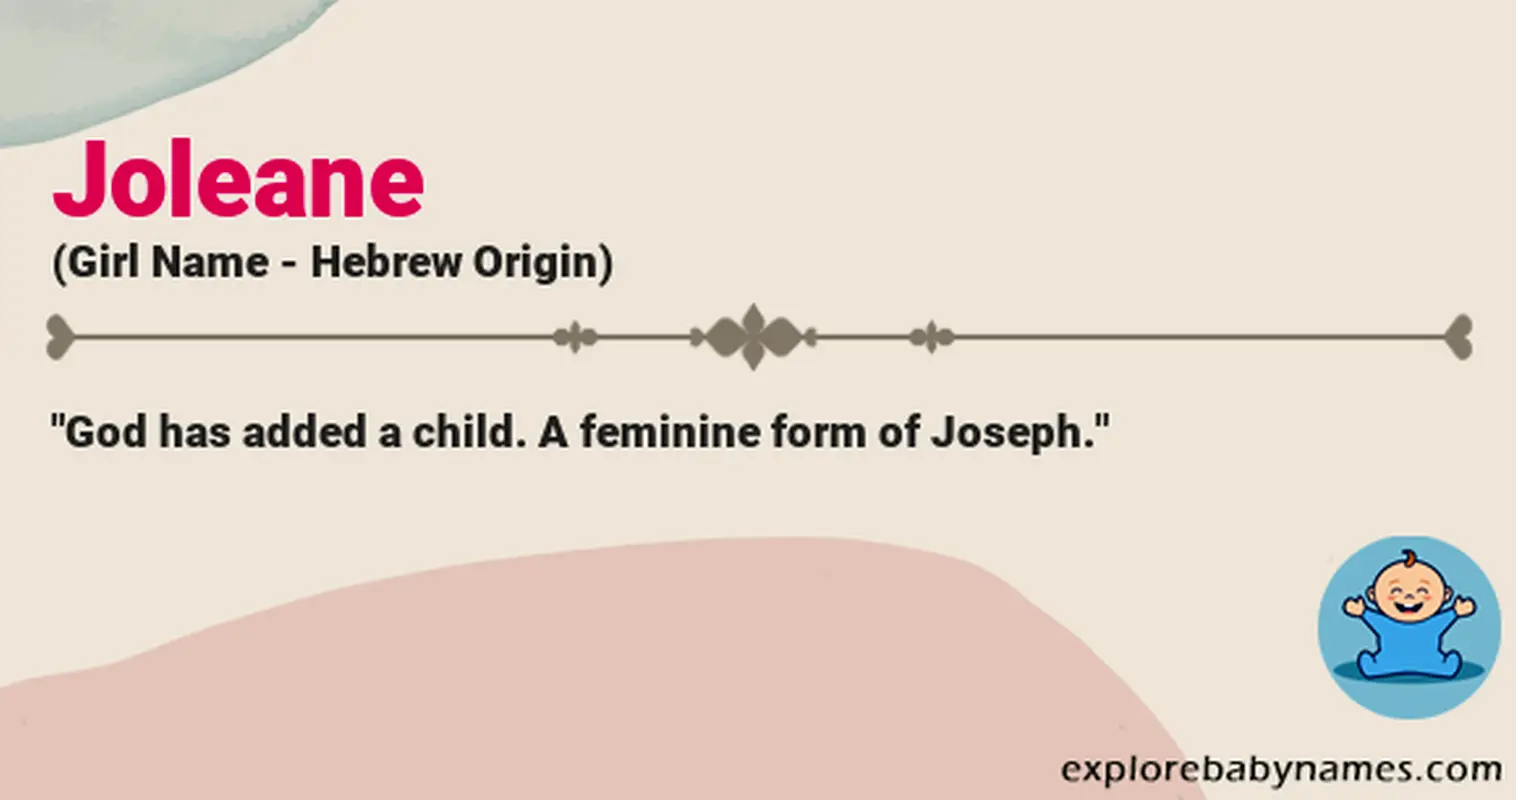 Meaning of Joleane